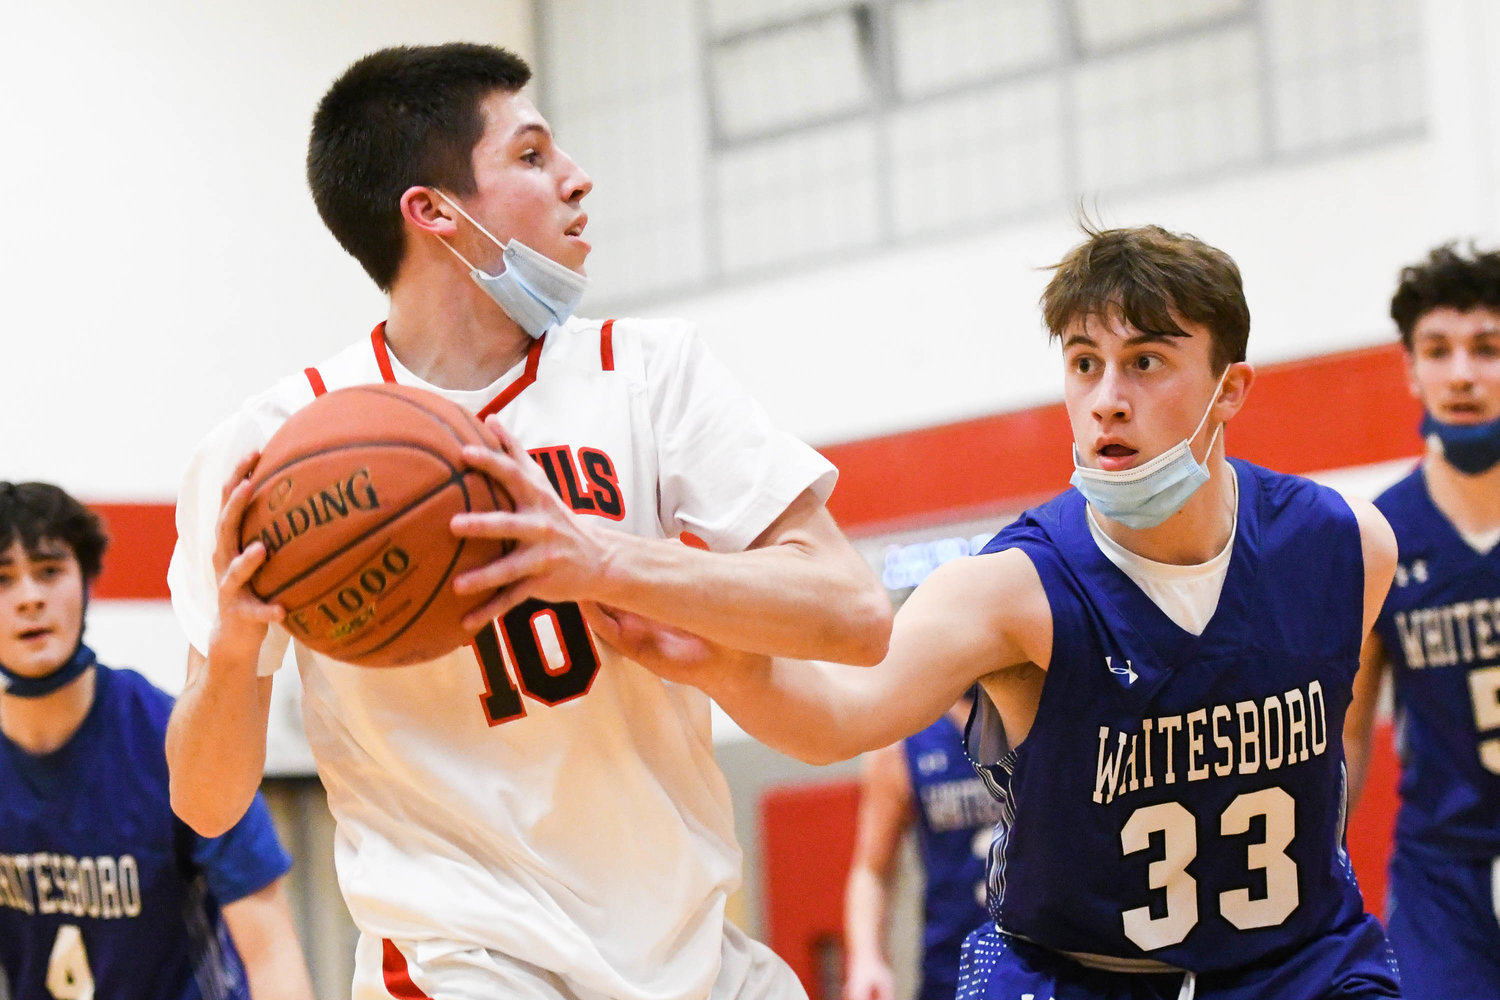 LOOKING TO PASS THE ROCK — Vernon-Verona-Sherrill’s Benjamin Wittman (10) attempts to pass the ball against Whitesboro player Daniel Russo (33) during Thursday’s Tri-Valley League game in Verona. The Red Devils won 48-47.